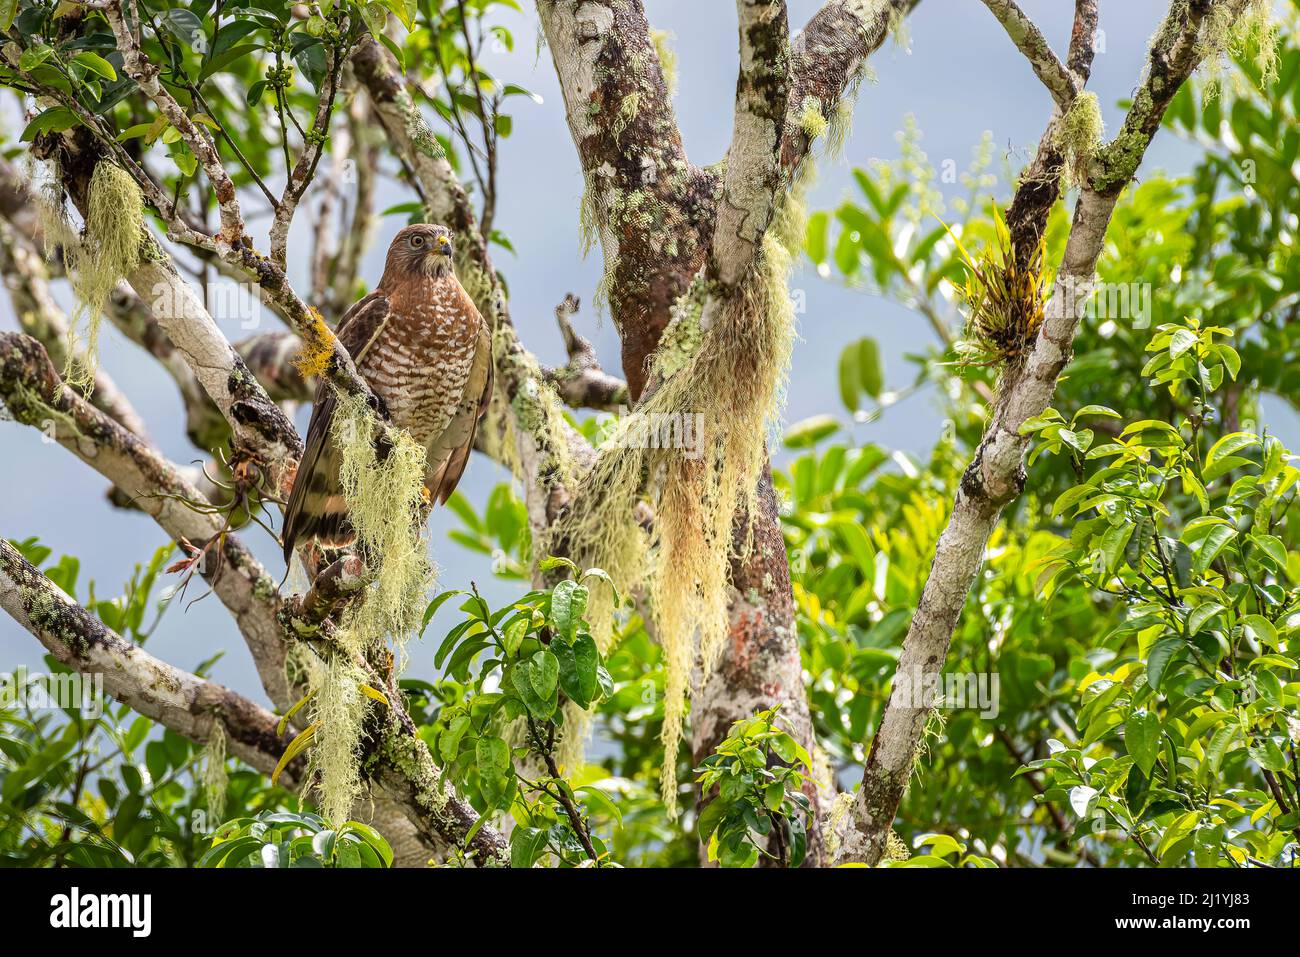 Broad winged hawk perched high up on a tree Stock Photo